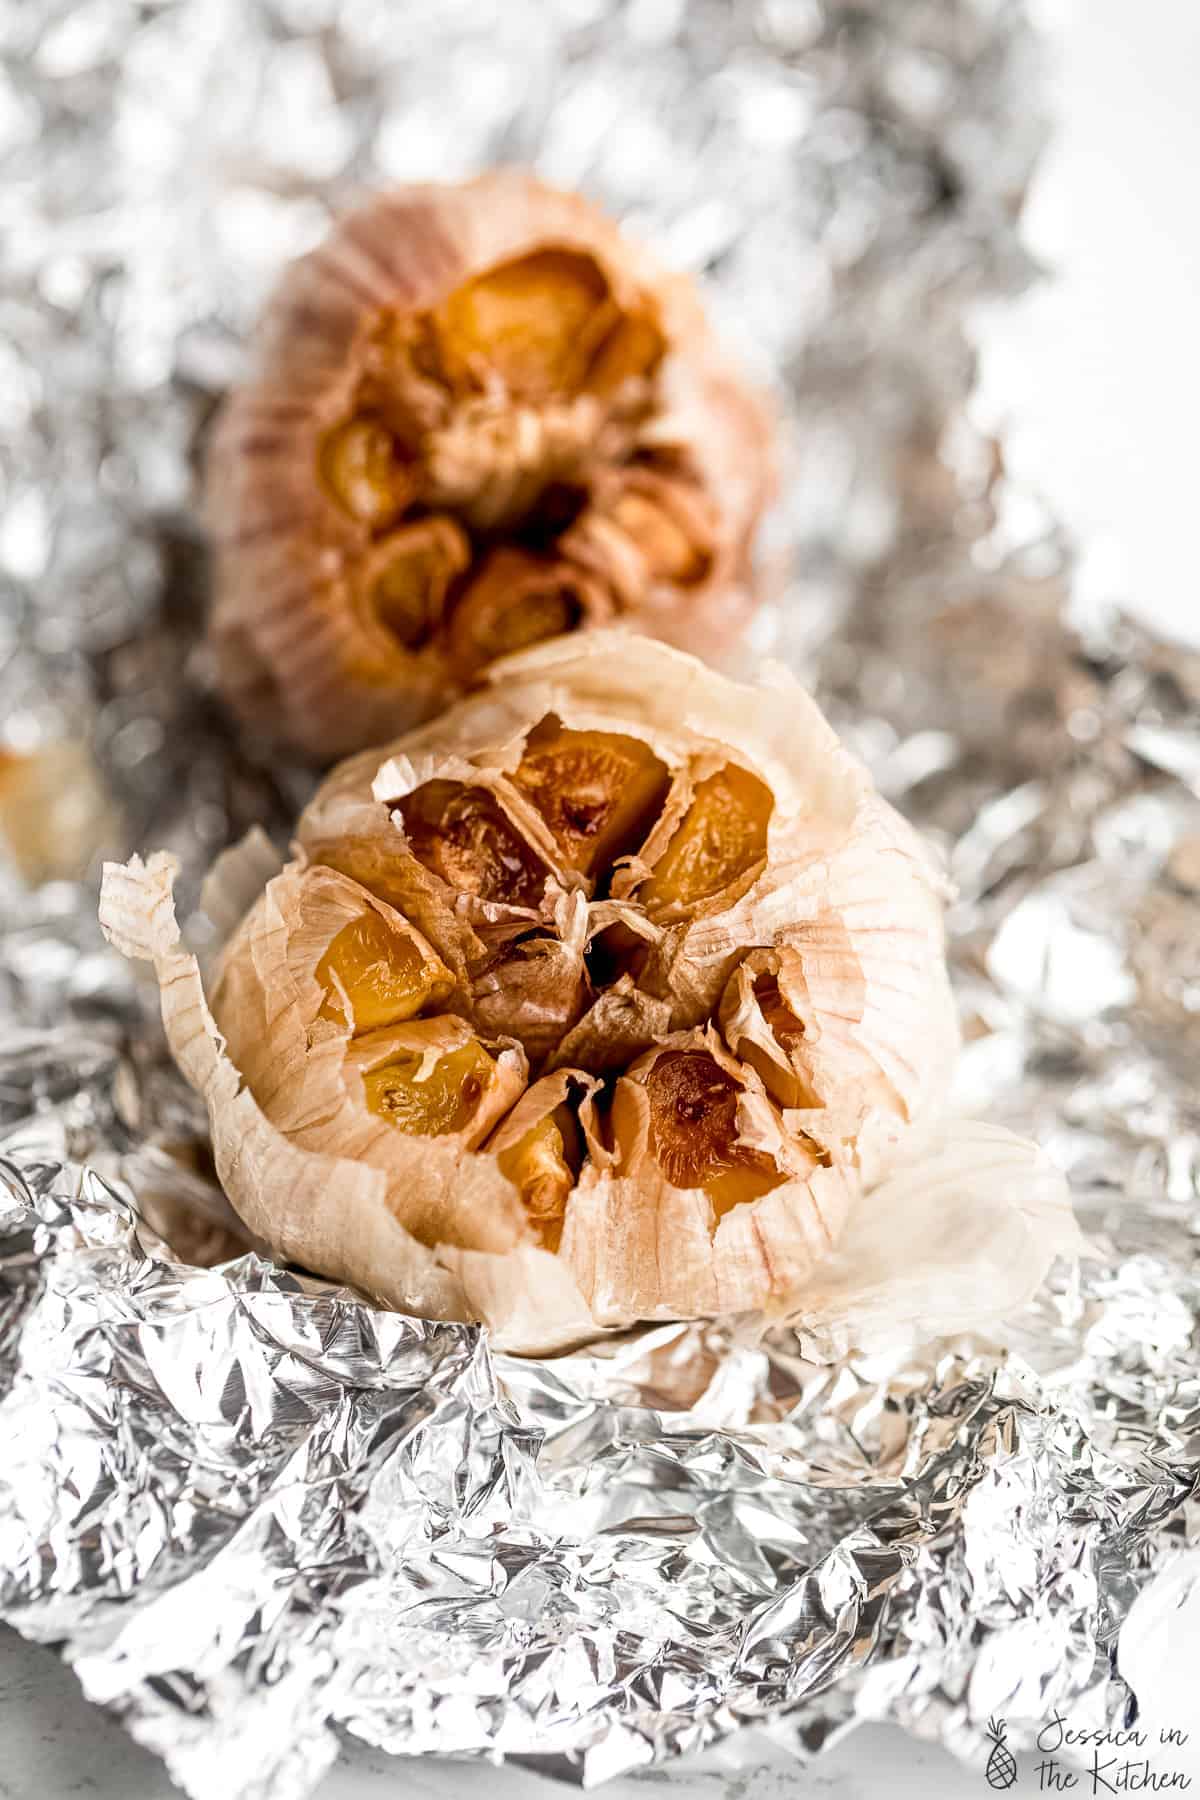 Two heads of roasted garlic on foil